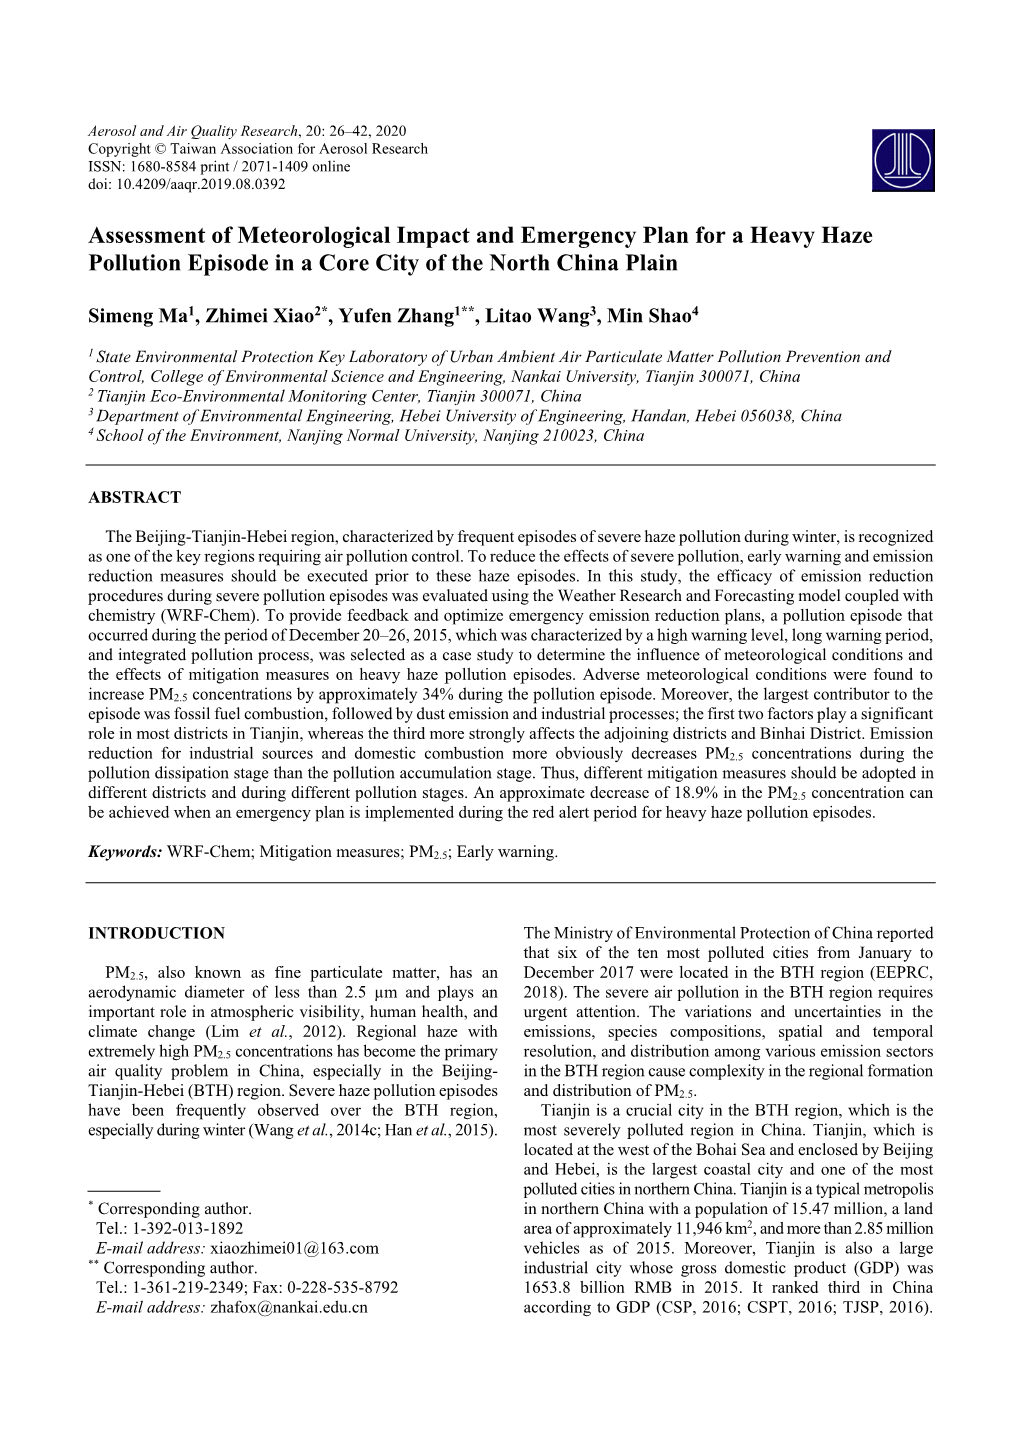 Assessment of Meteorological Impact and Emergency Plan for a Heavy Haze Pollution Episode in a Core City of the North China Plain